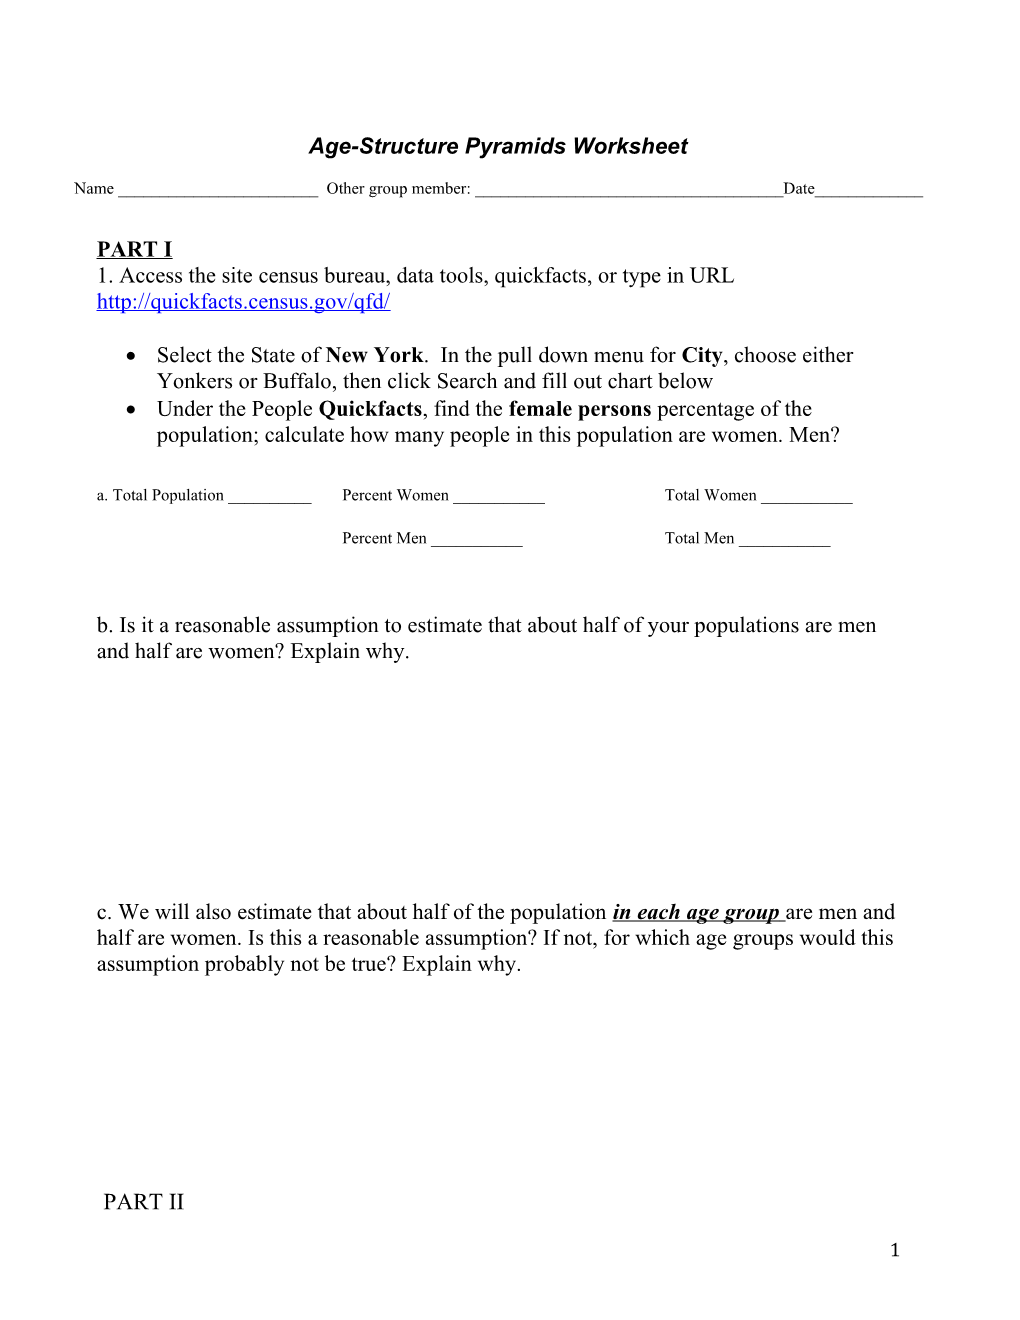 Age-Structure Pyramids Worksheet